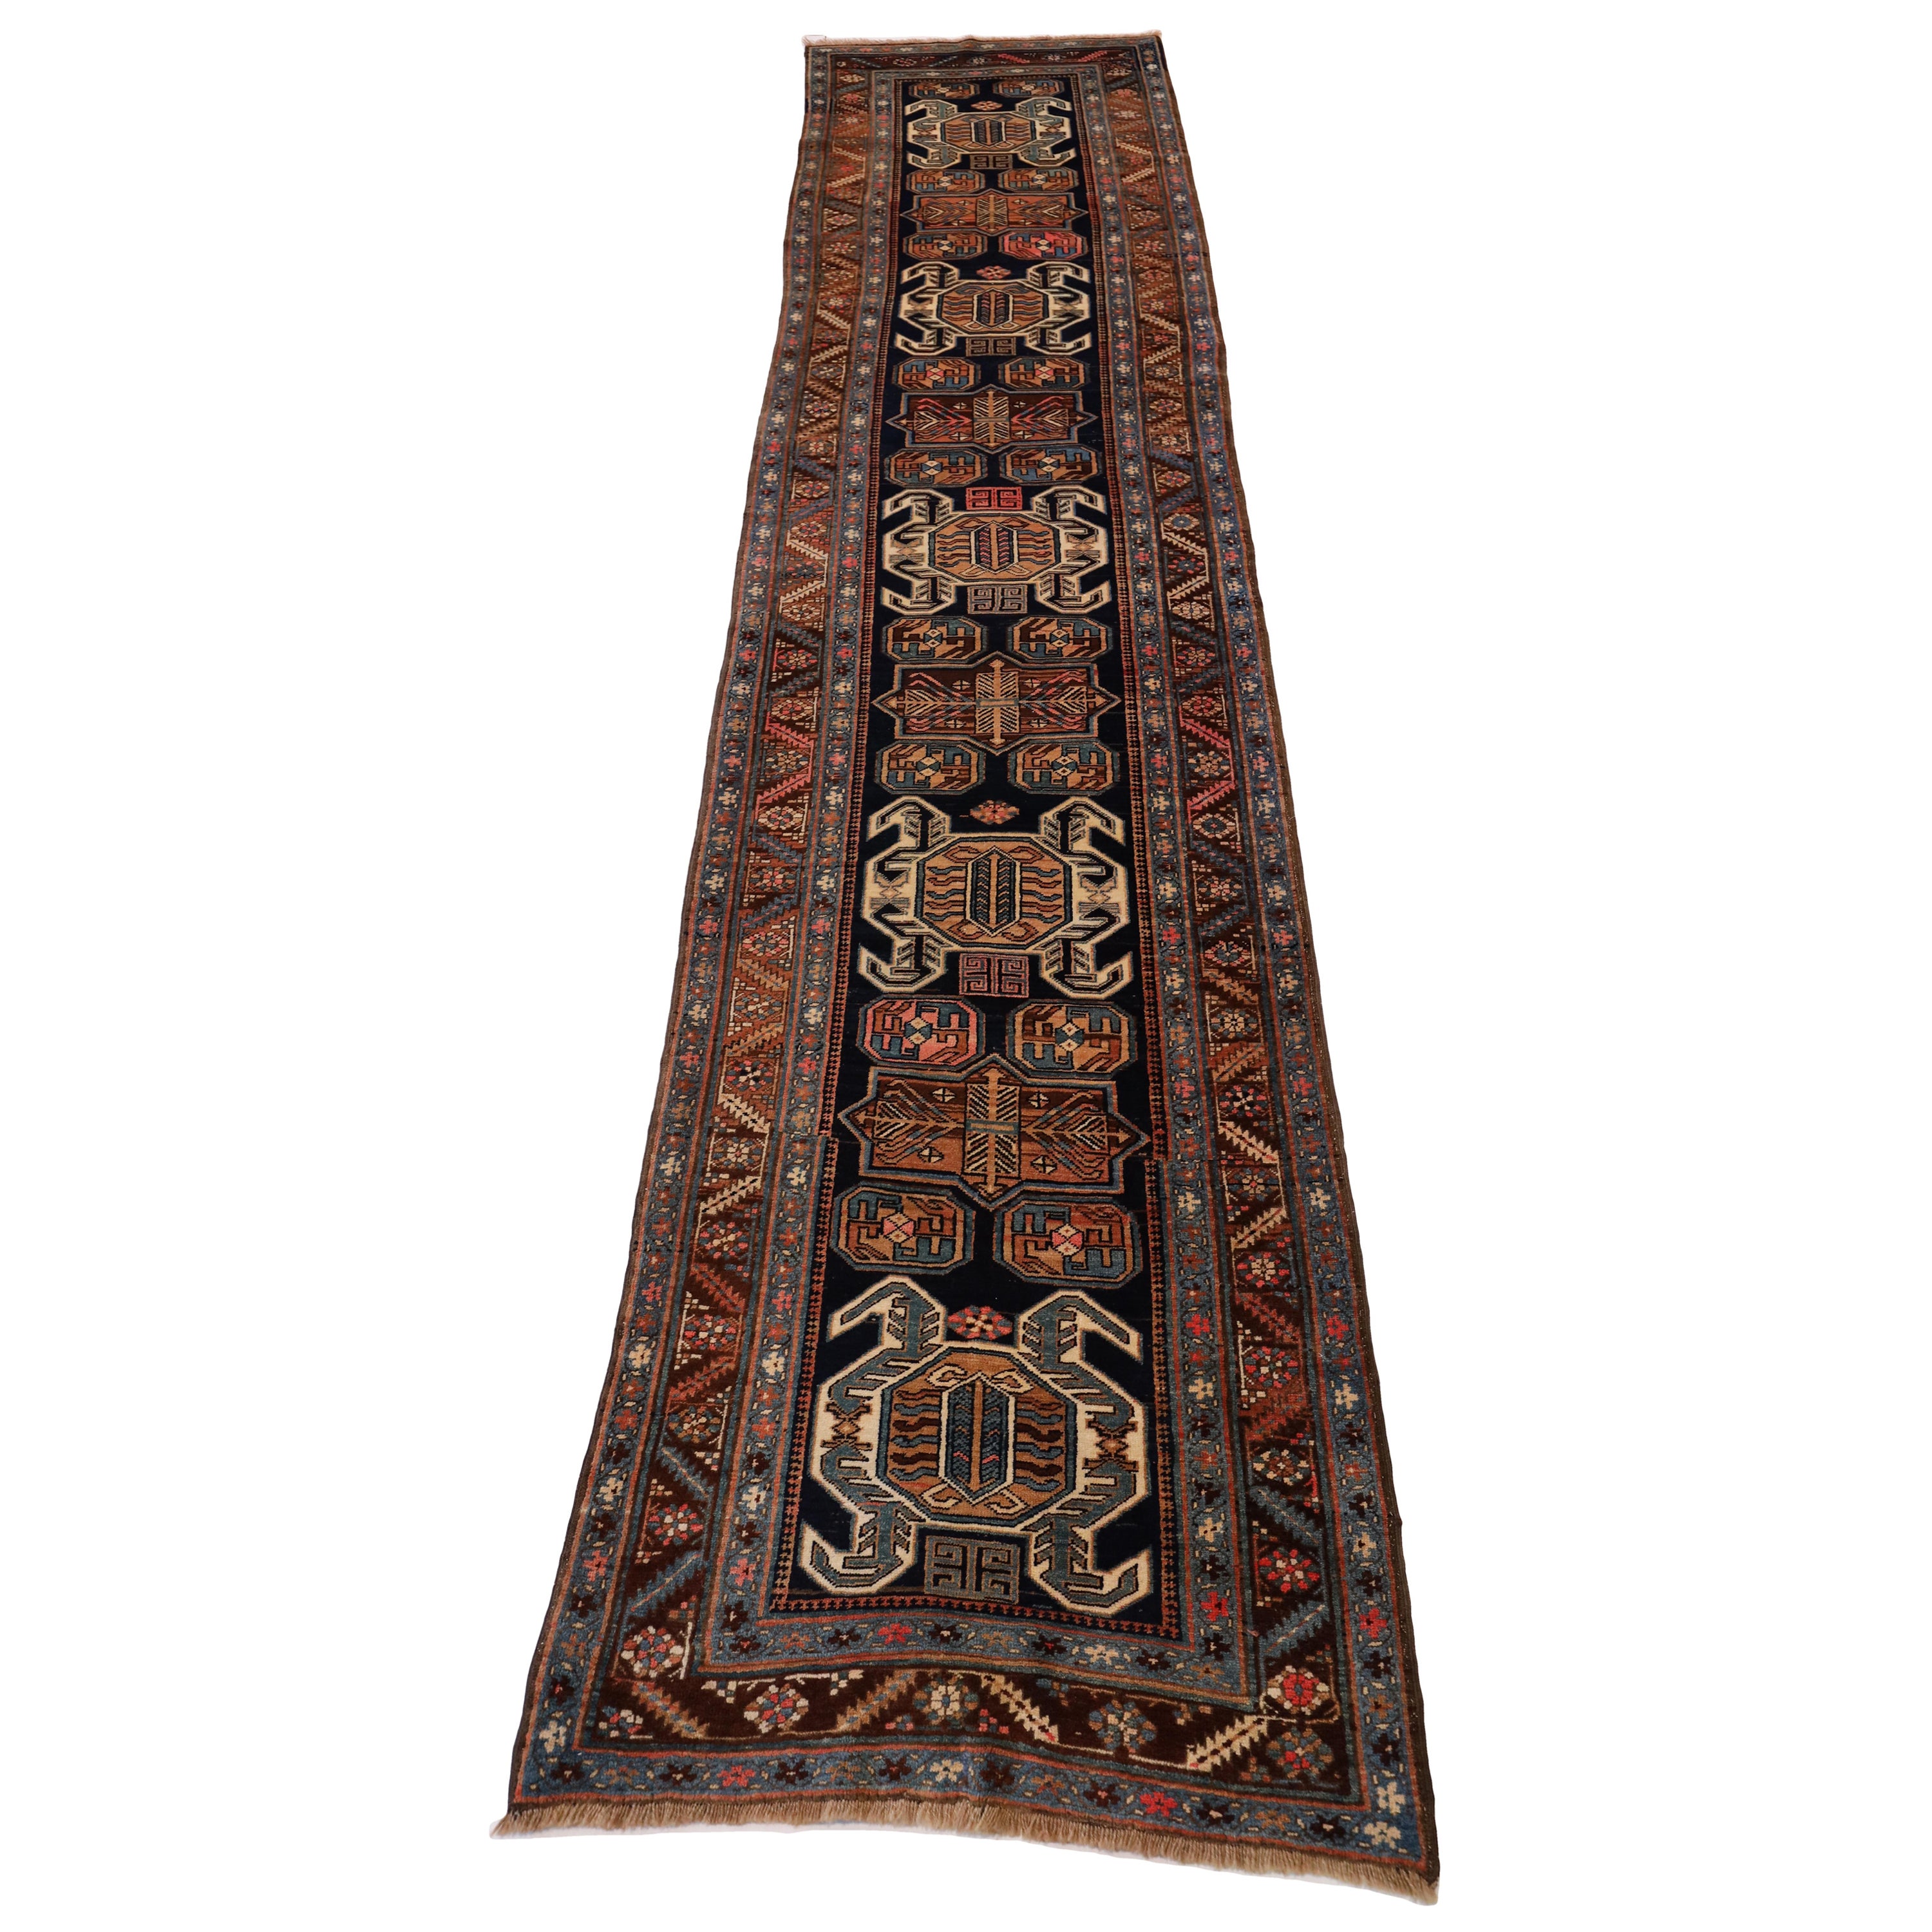 North-Western Persian Antique runner - 3'3" x 14'1" For Sale